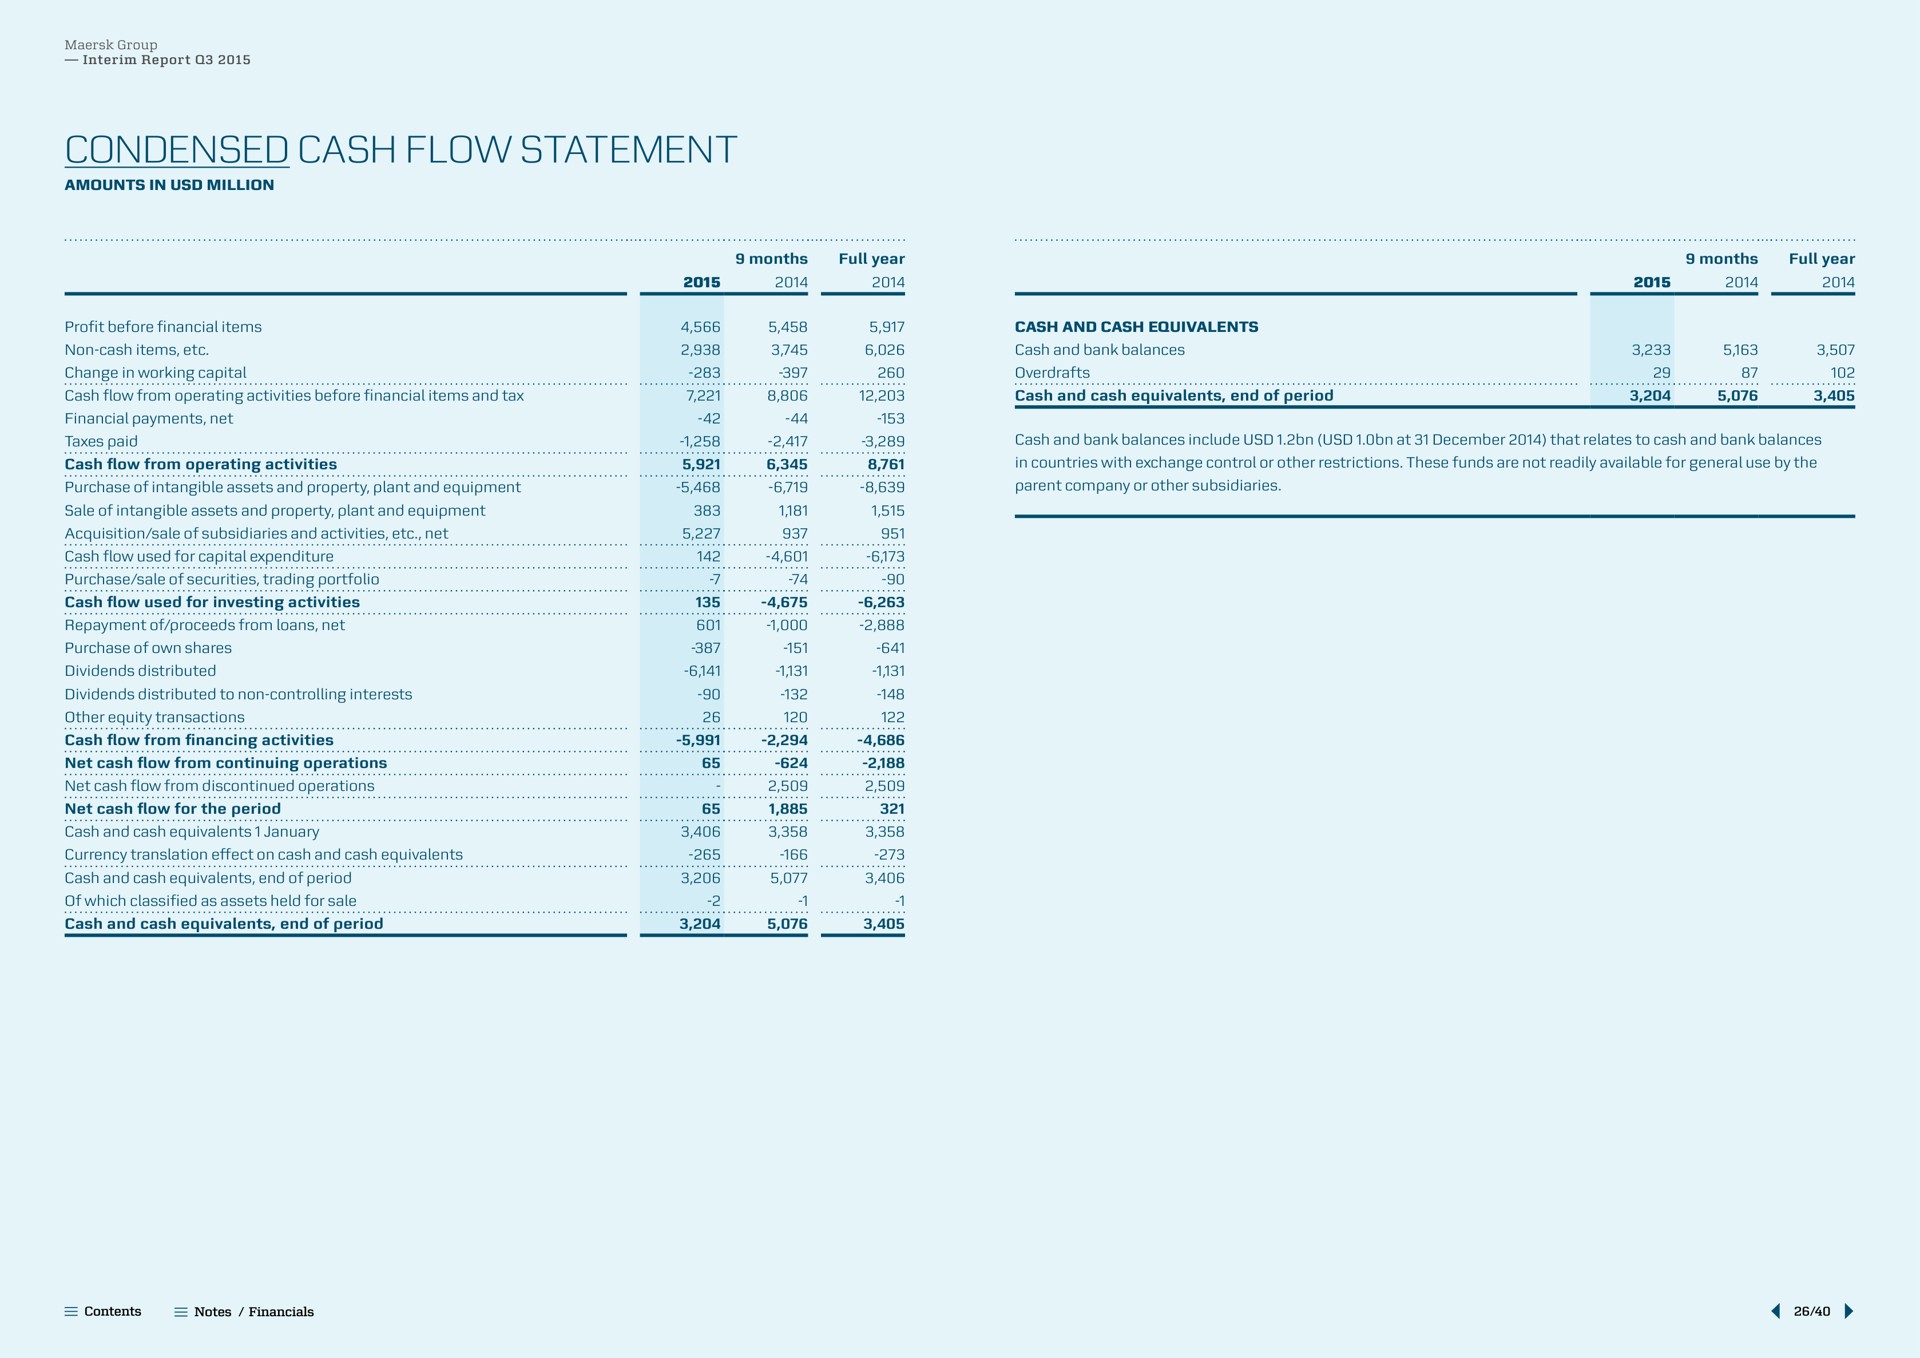 condensed cash flow statement from operating activities | Maersk